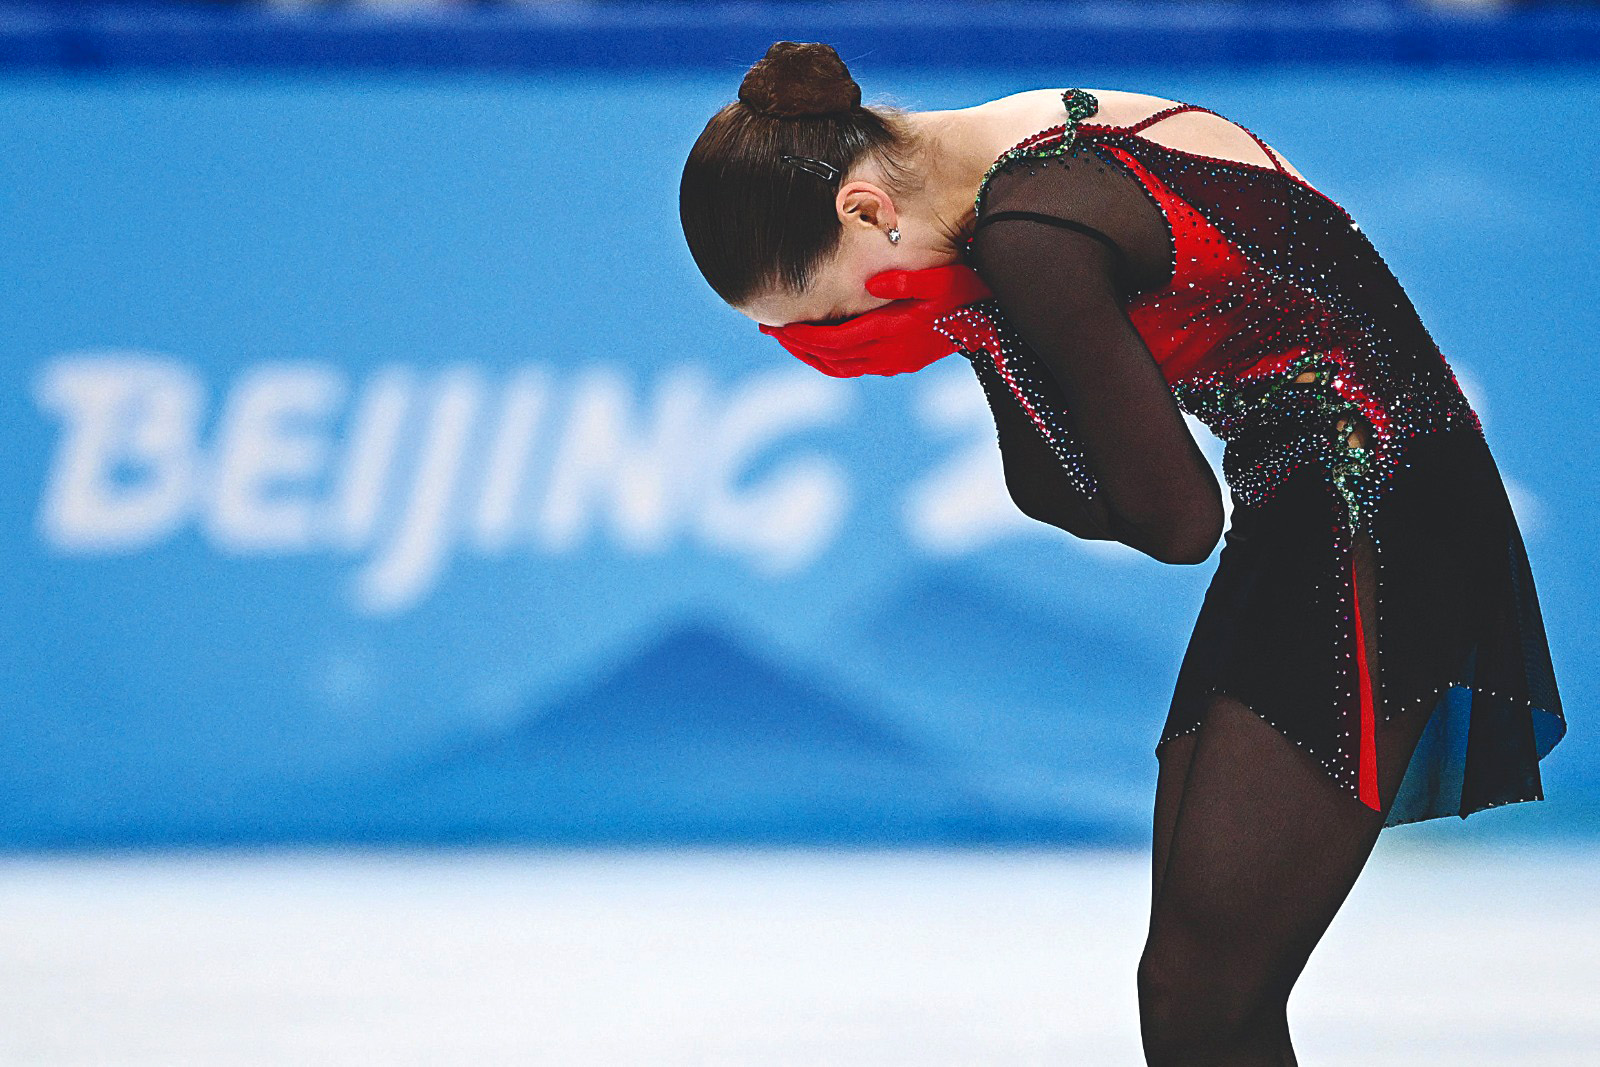 BEIJING: Russia's Kamila Valieva reacts after competing in the women's single skating free skating of the figure skating event during the Beijing 2022 Winter Olympic Games at the Capital Indoor Stadium yesterday. - AFP